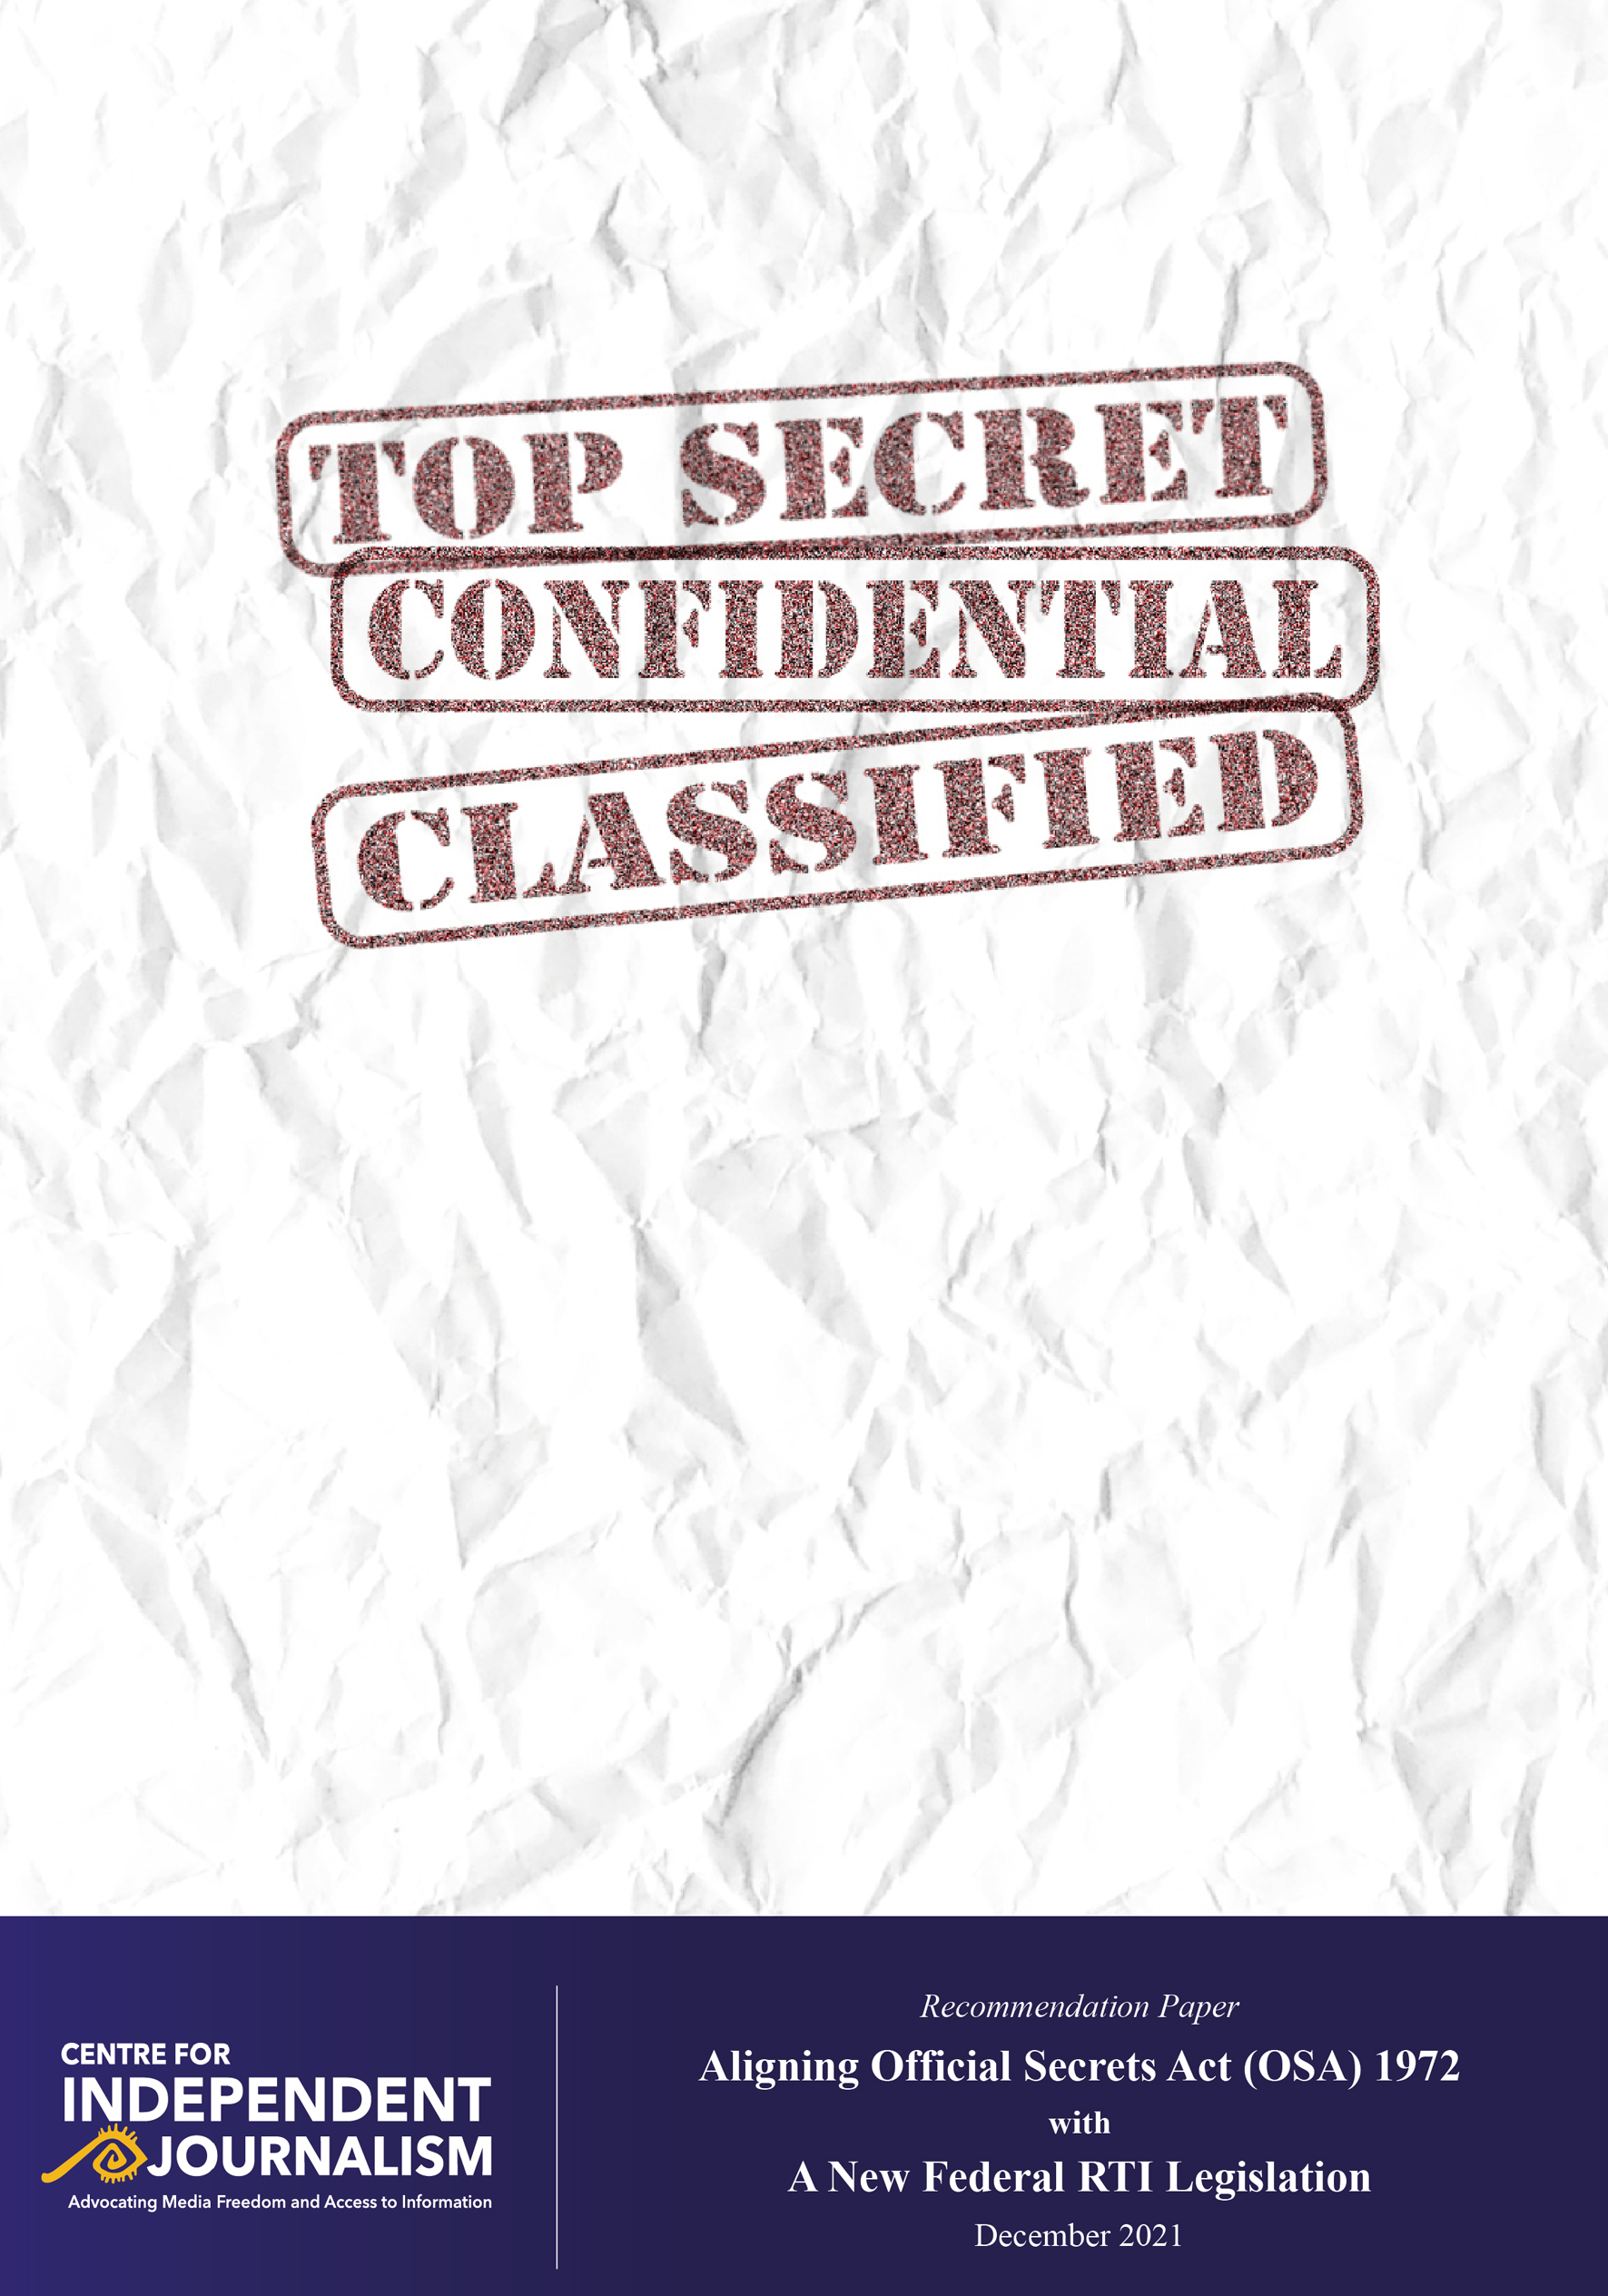 Recommendation Paper Aligning Official Secrets Act (OSA) 1972 with A New Federal RTI Legislation